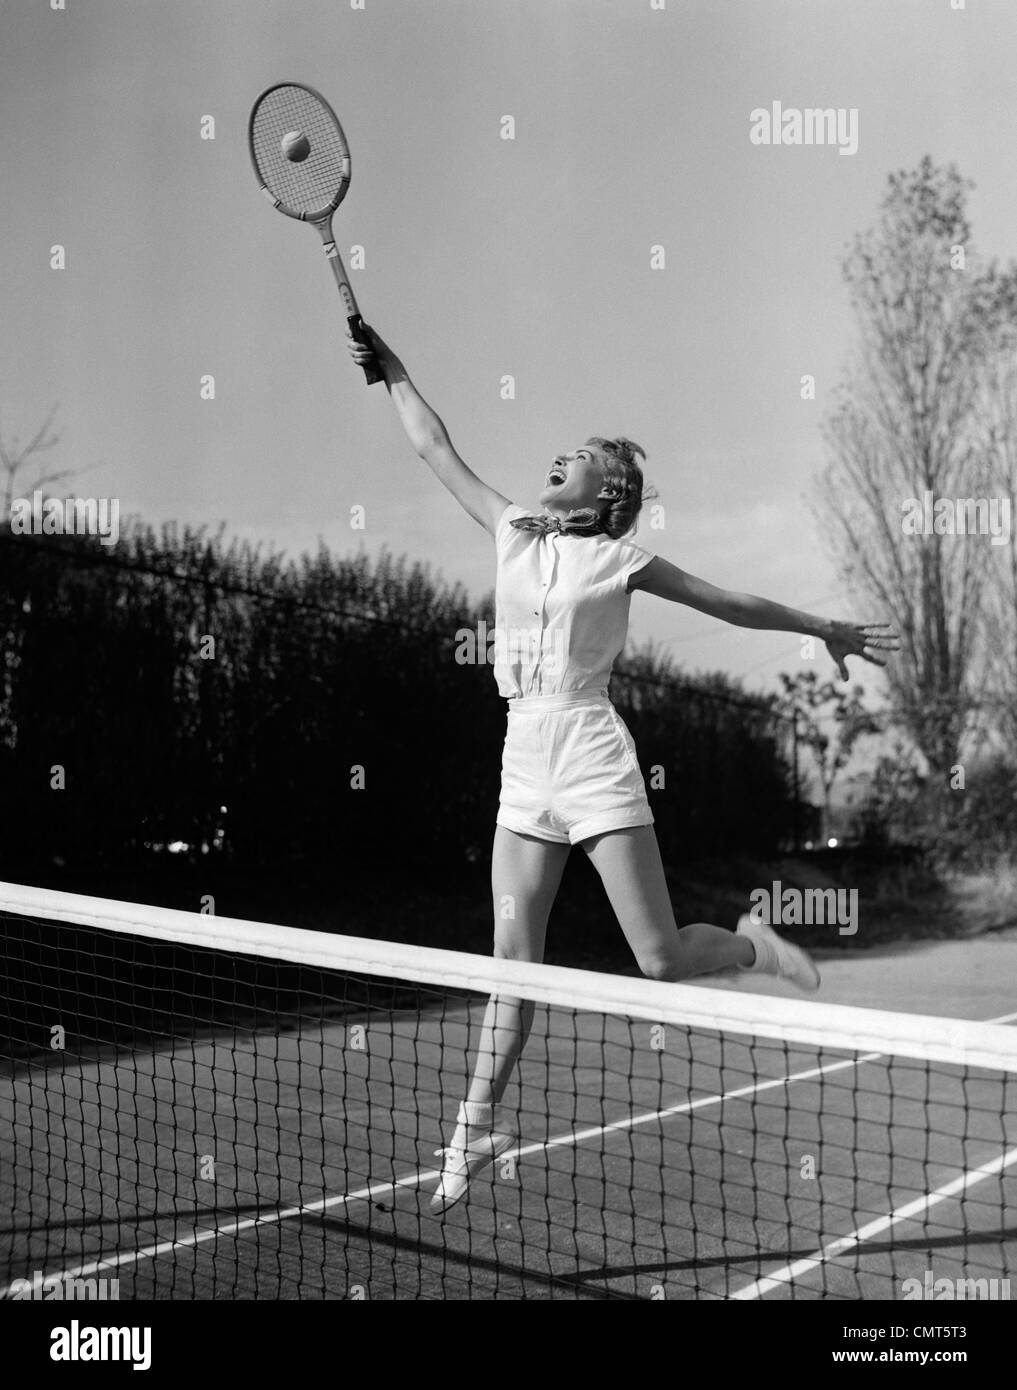 1950s WOMAN JUMPING TO HIT TENNIS BALL Stock Photo